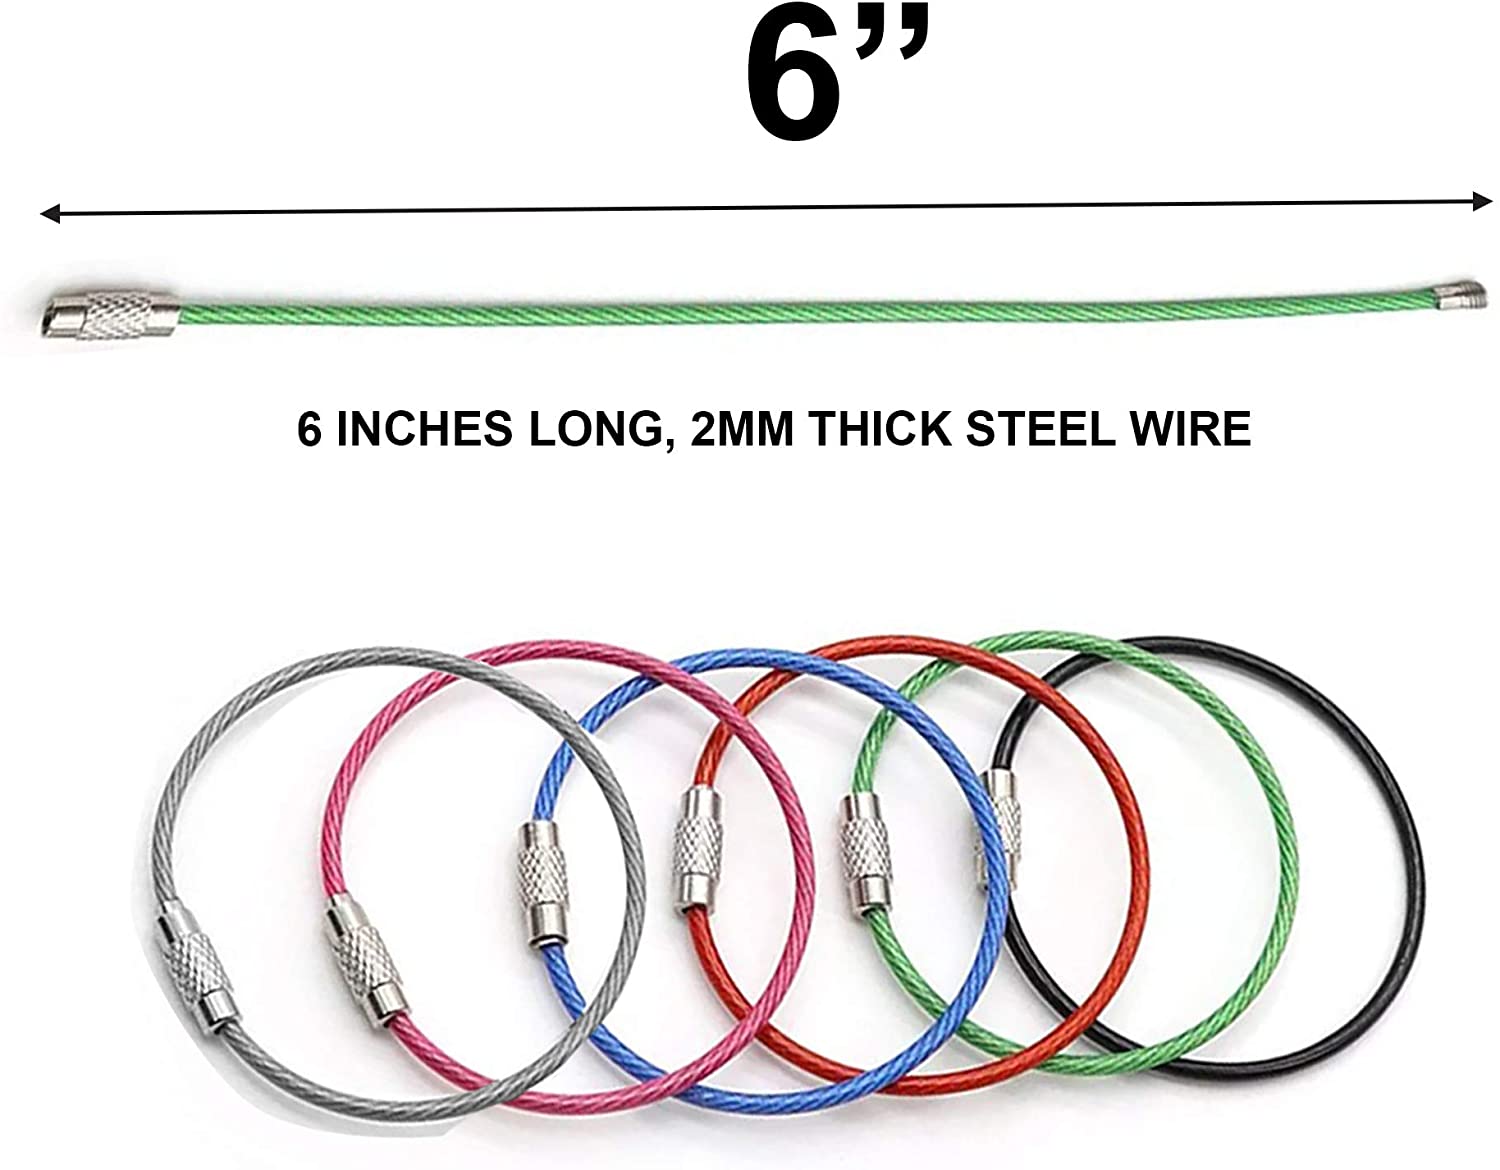 Wire Keyring – 4 Inch Flexible Keychain with Plastic Coated Steel – 12 Pack